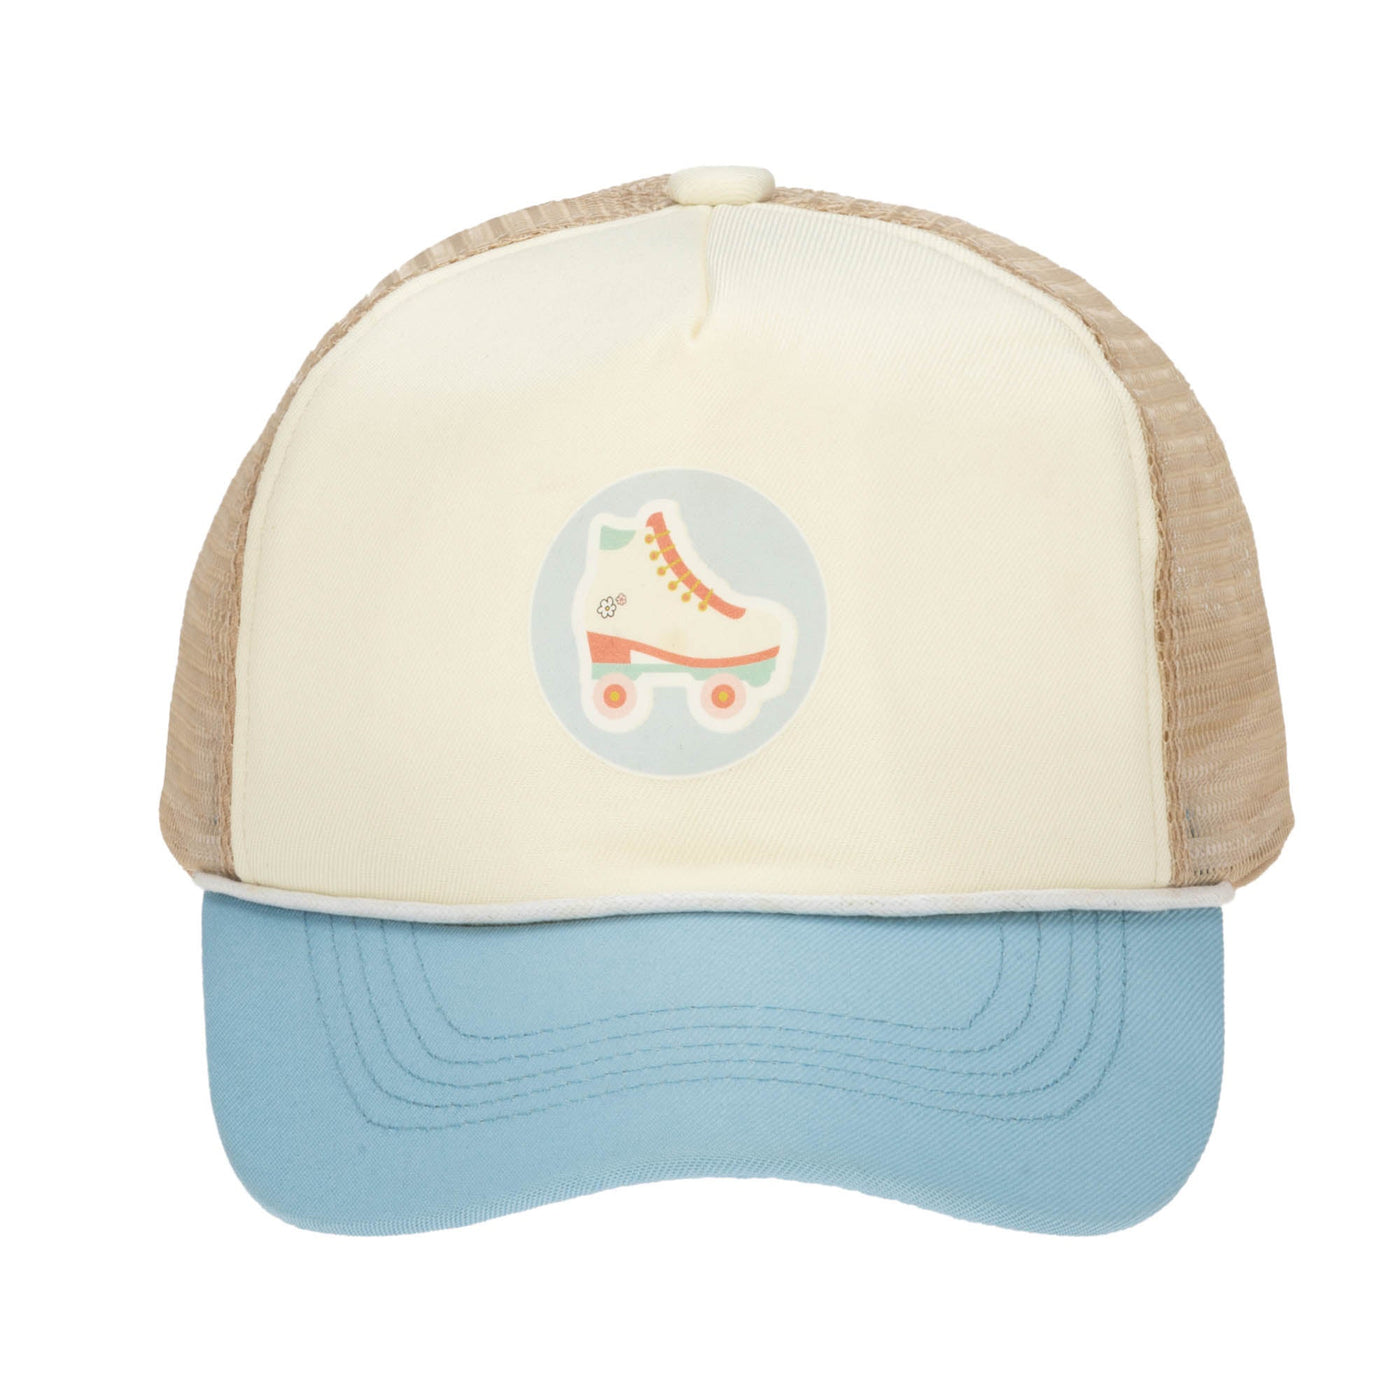 Trucker - Cut And Sew Trucker Hat With Roller-skate Graphic